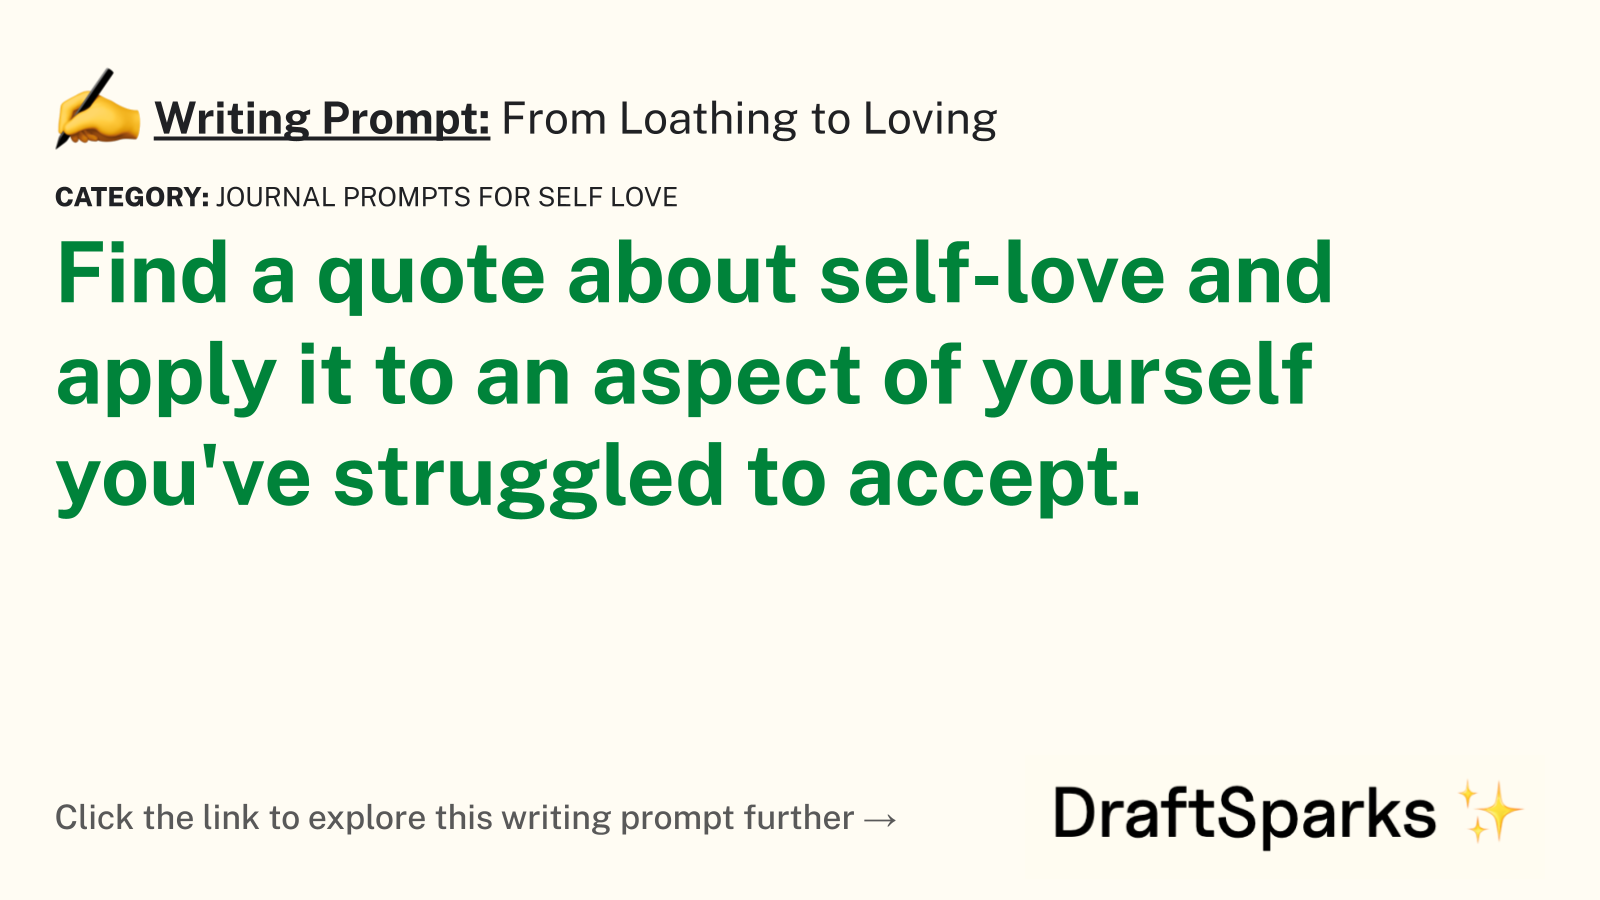 From Loathing to Loving